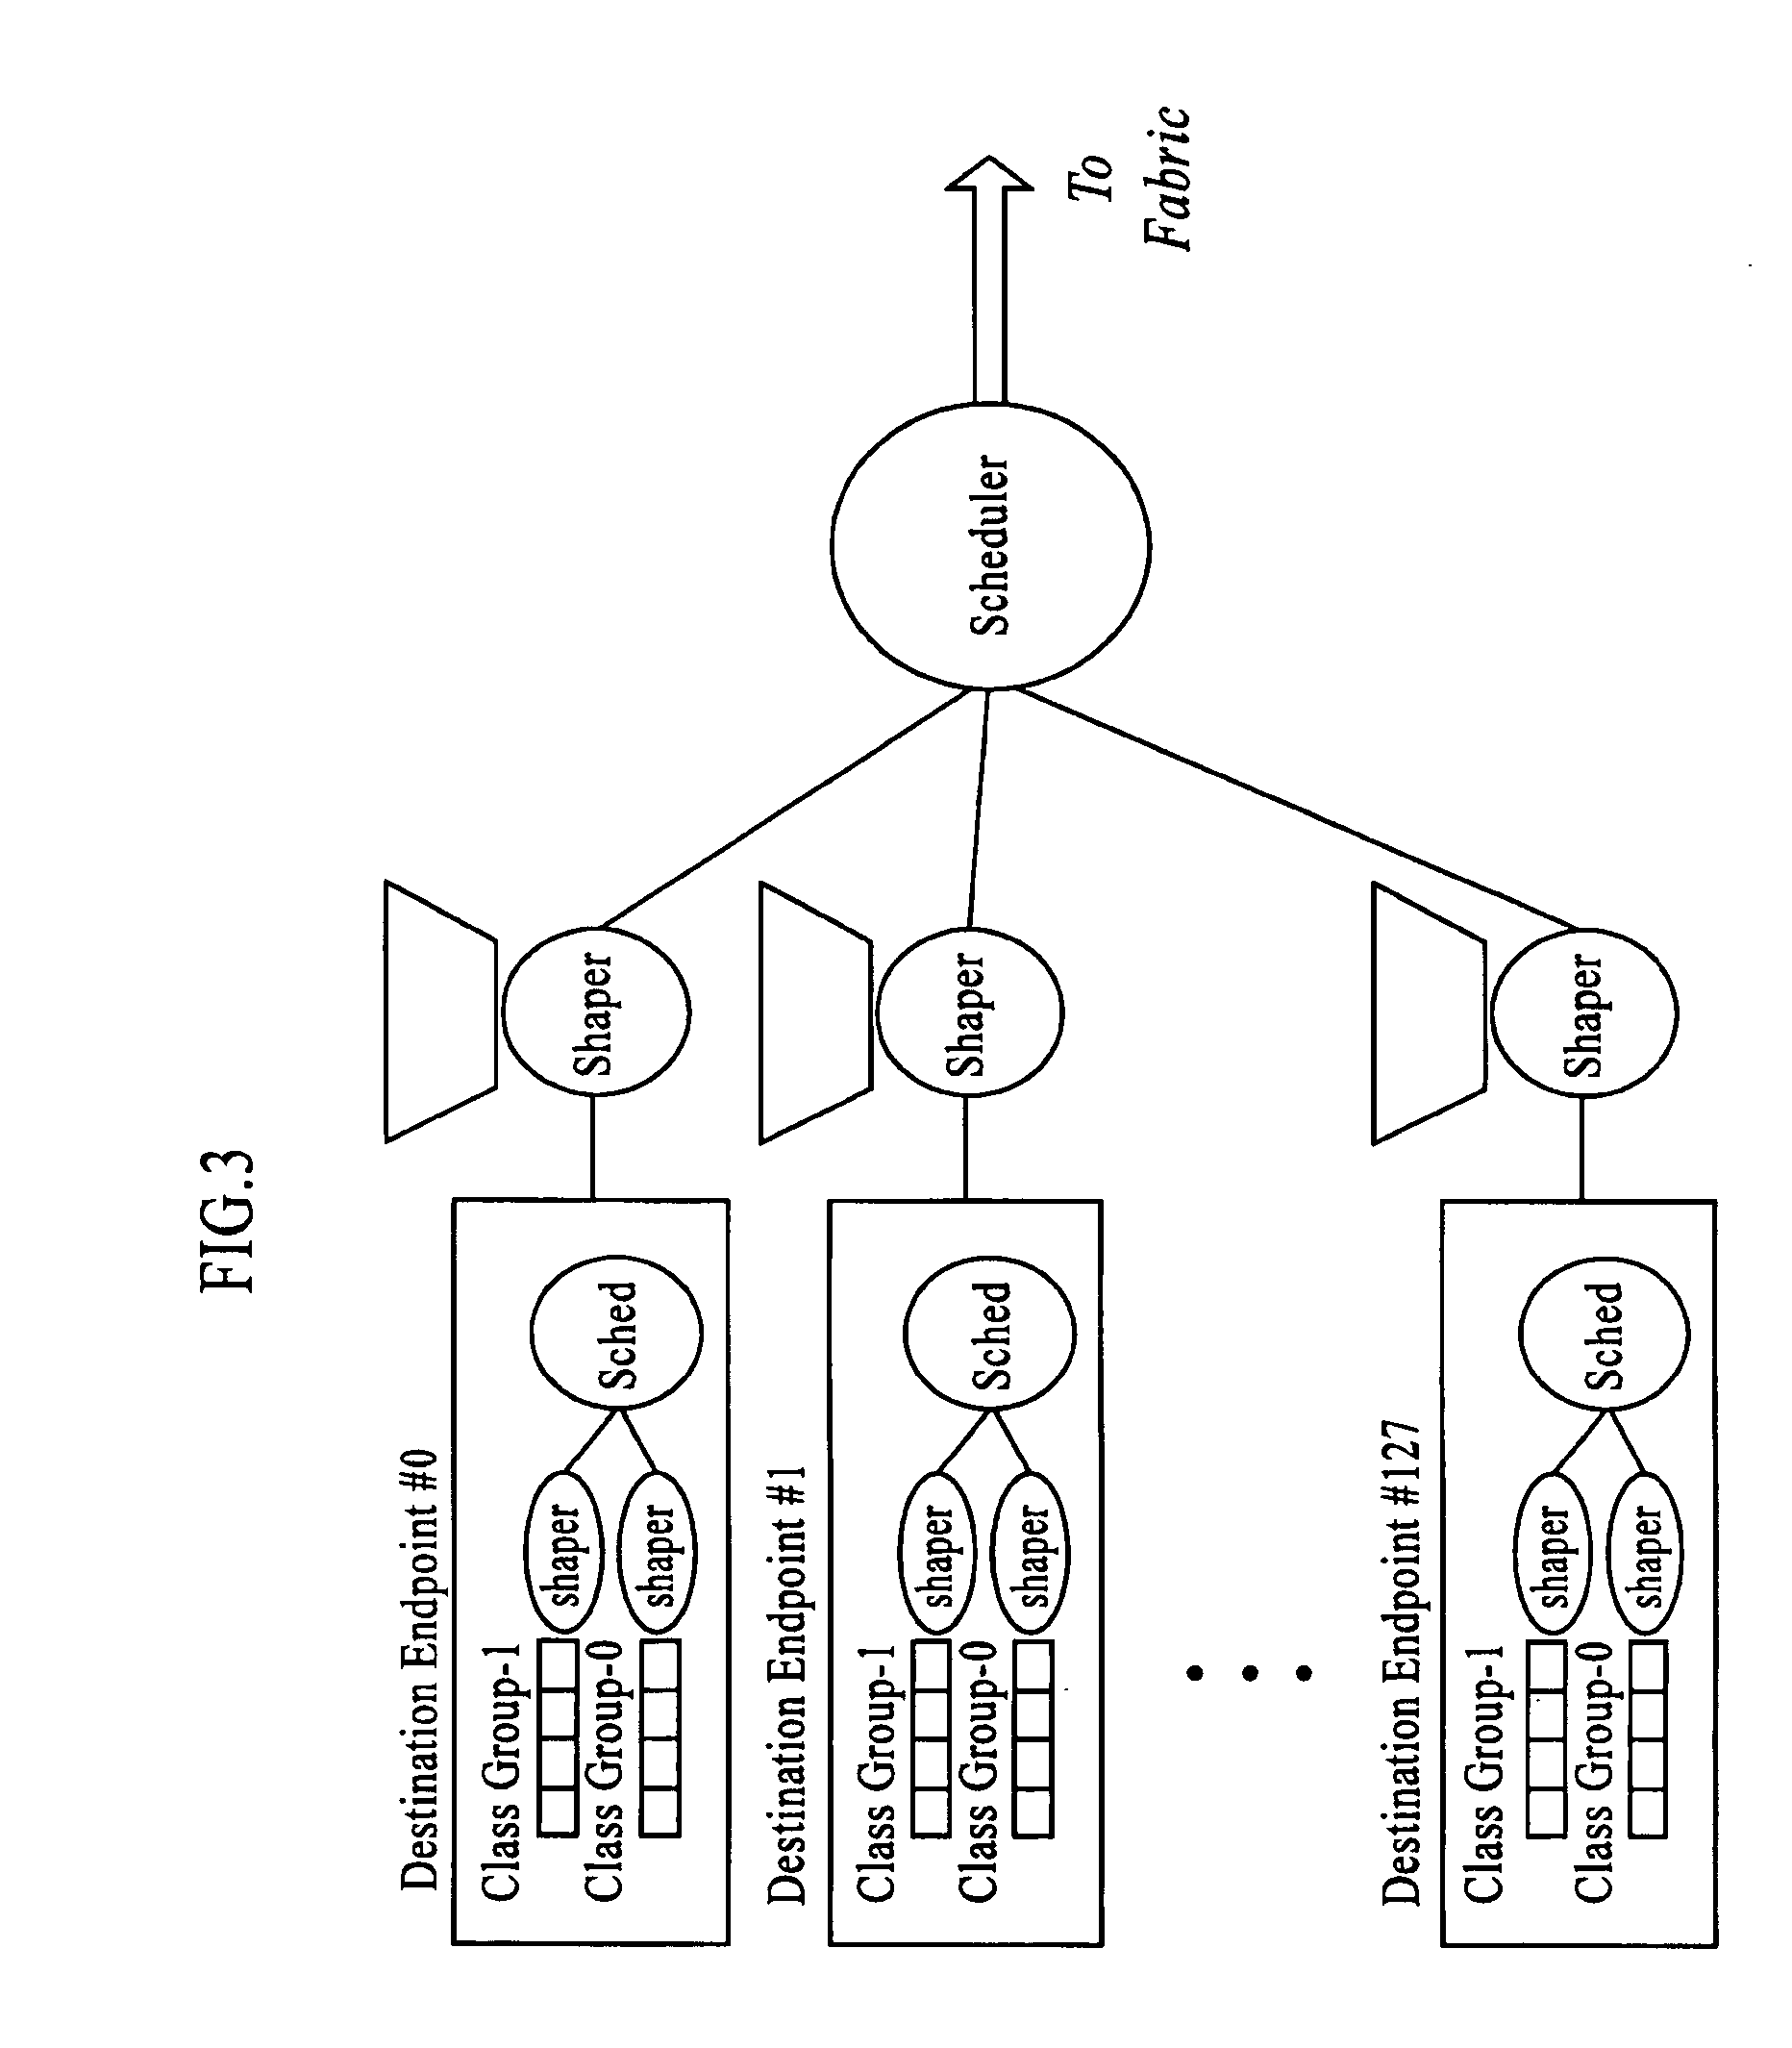 Intelligent fabric congestion detection apparatus and method